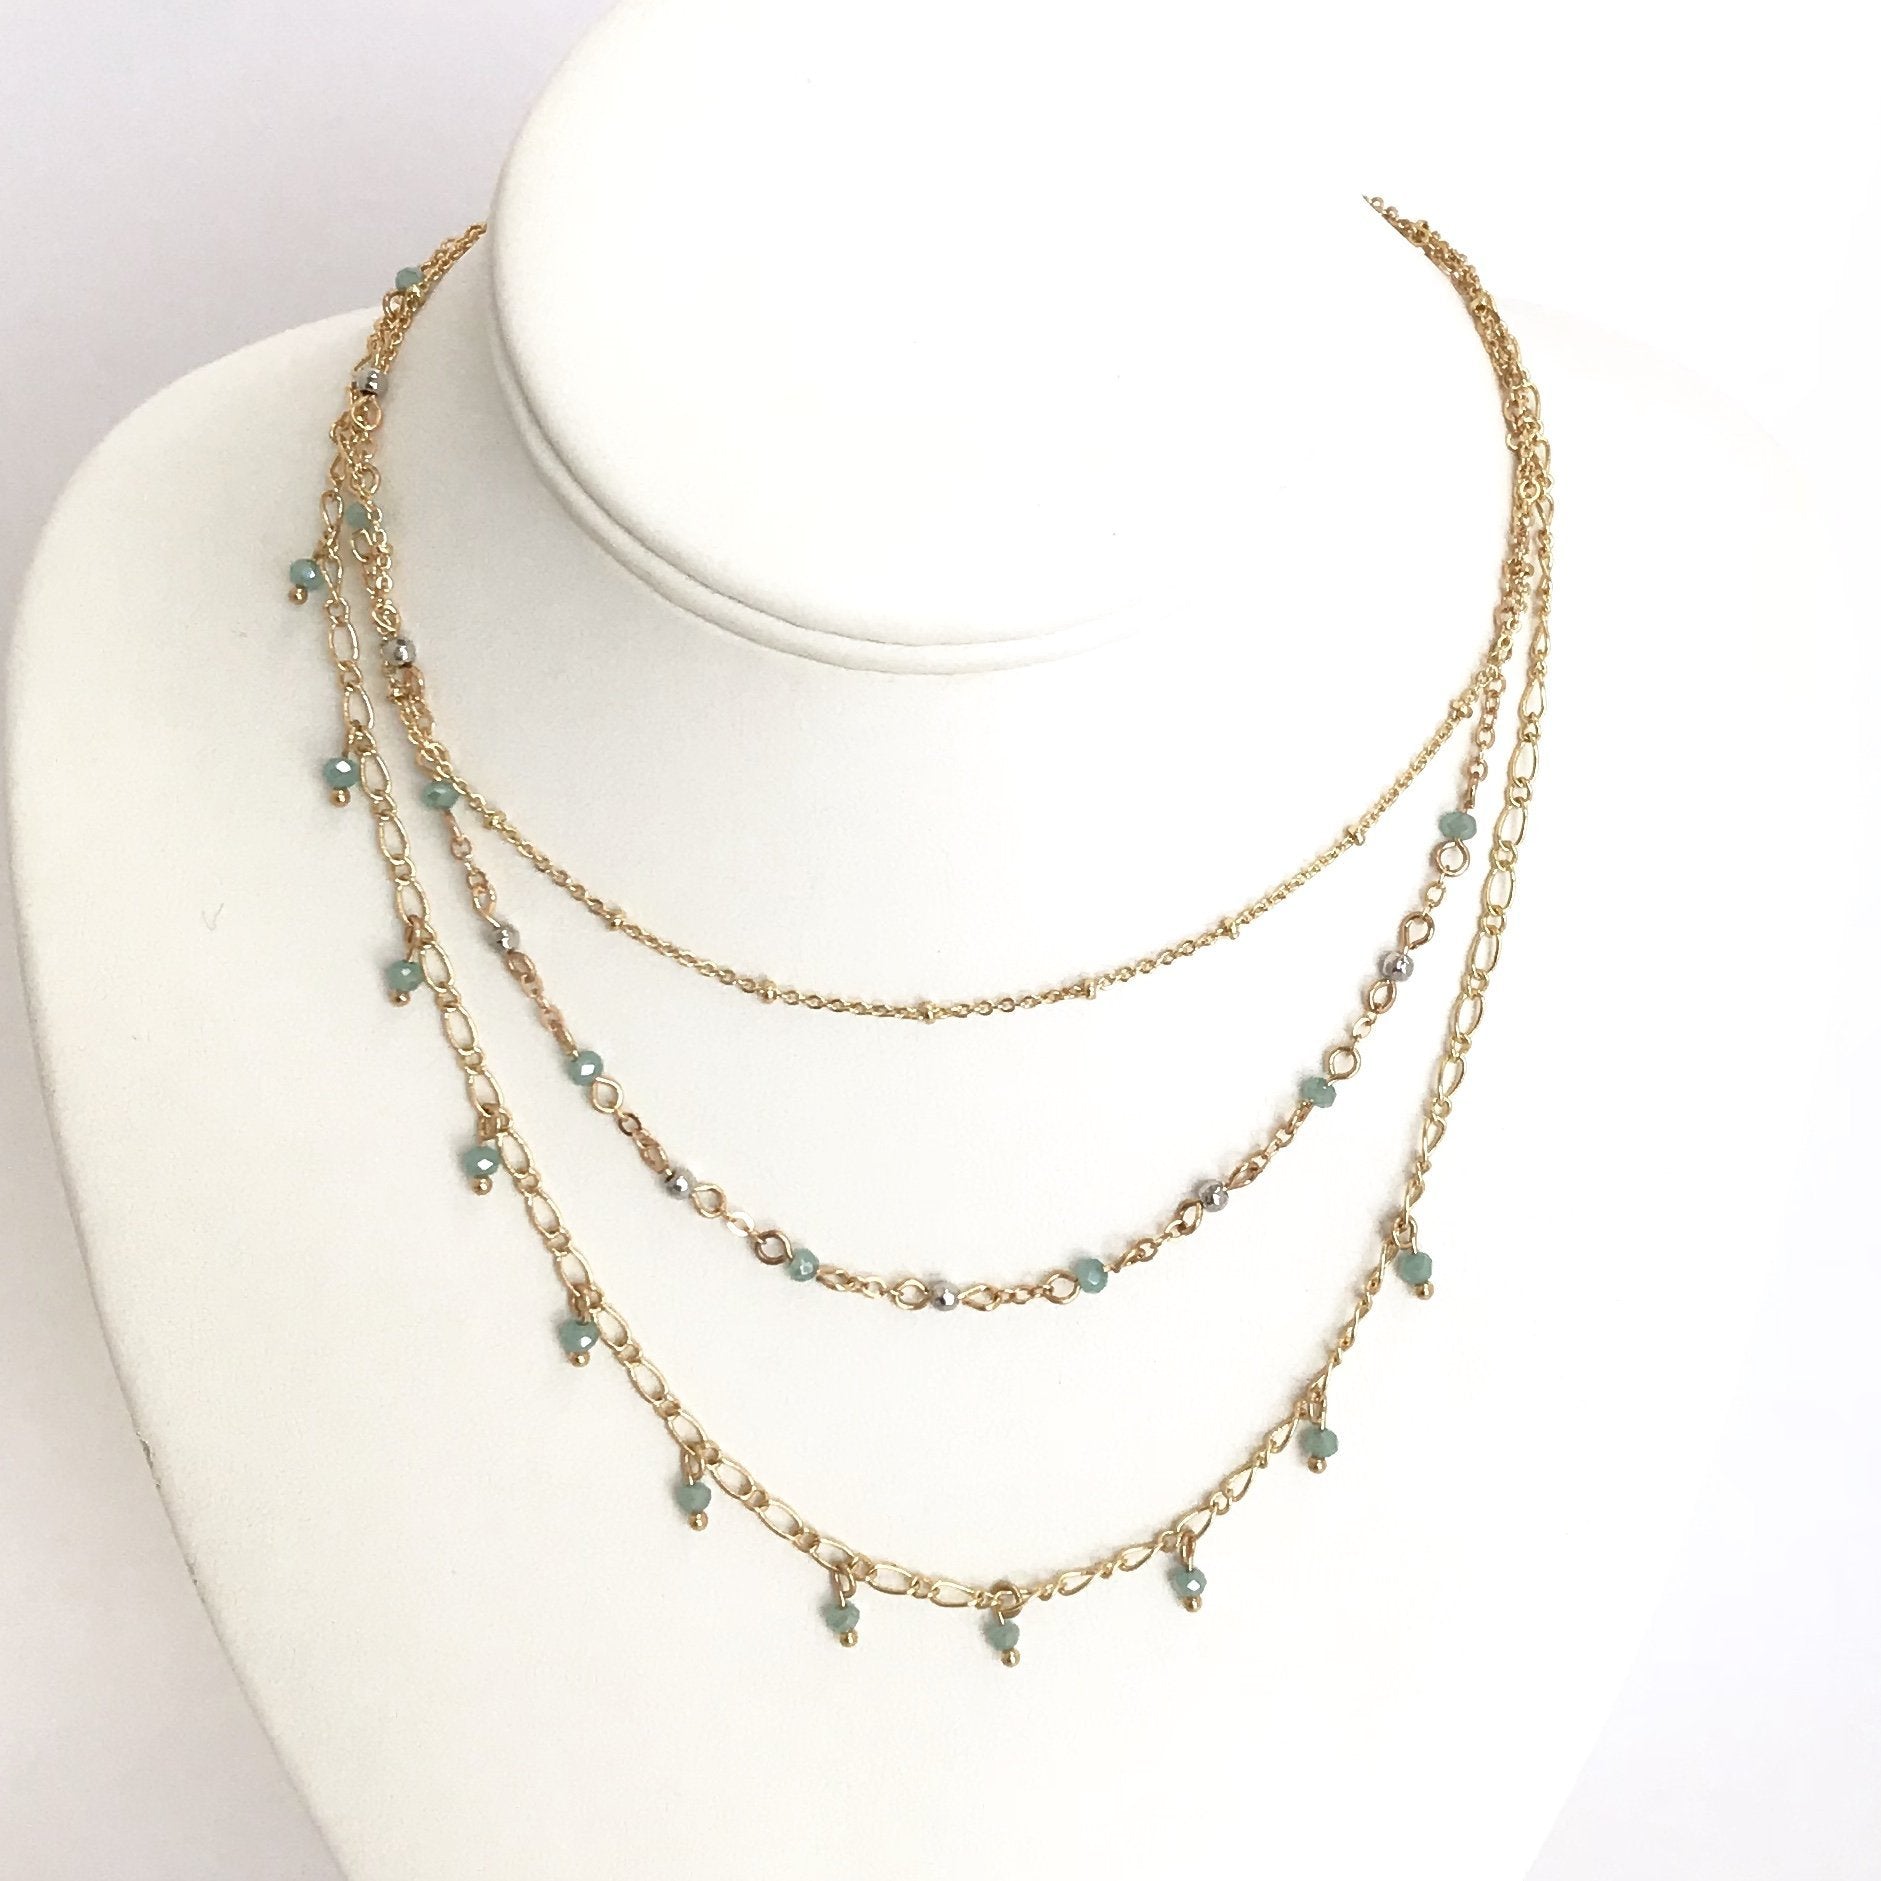 Level Up Turquoise Layered Necklace in Gold - Dainty Hooligan